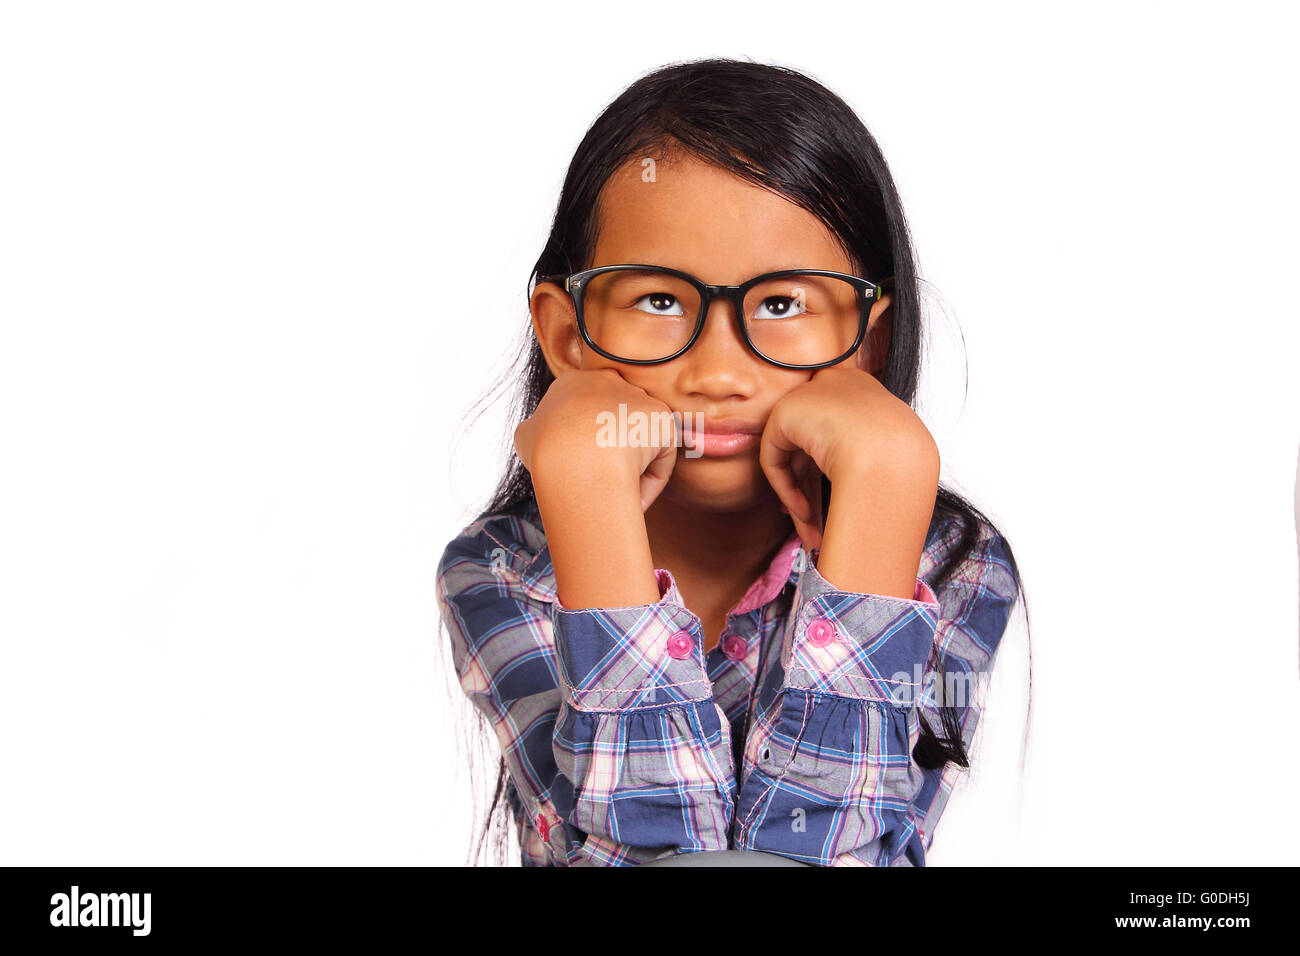 Little girl with glasses showing bored gesture isolated on white Stock Photo